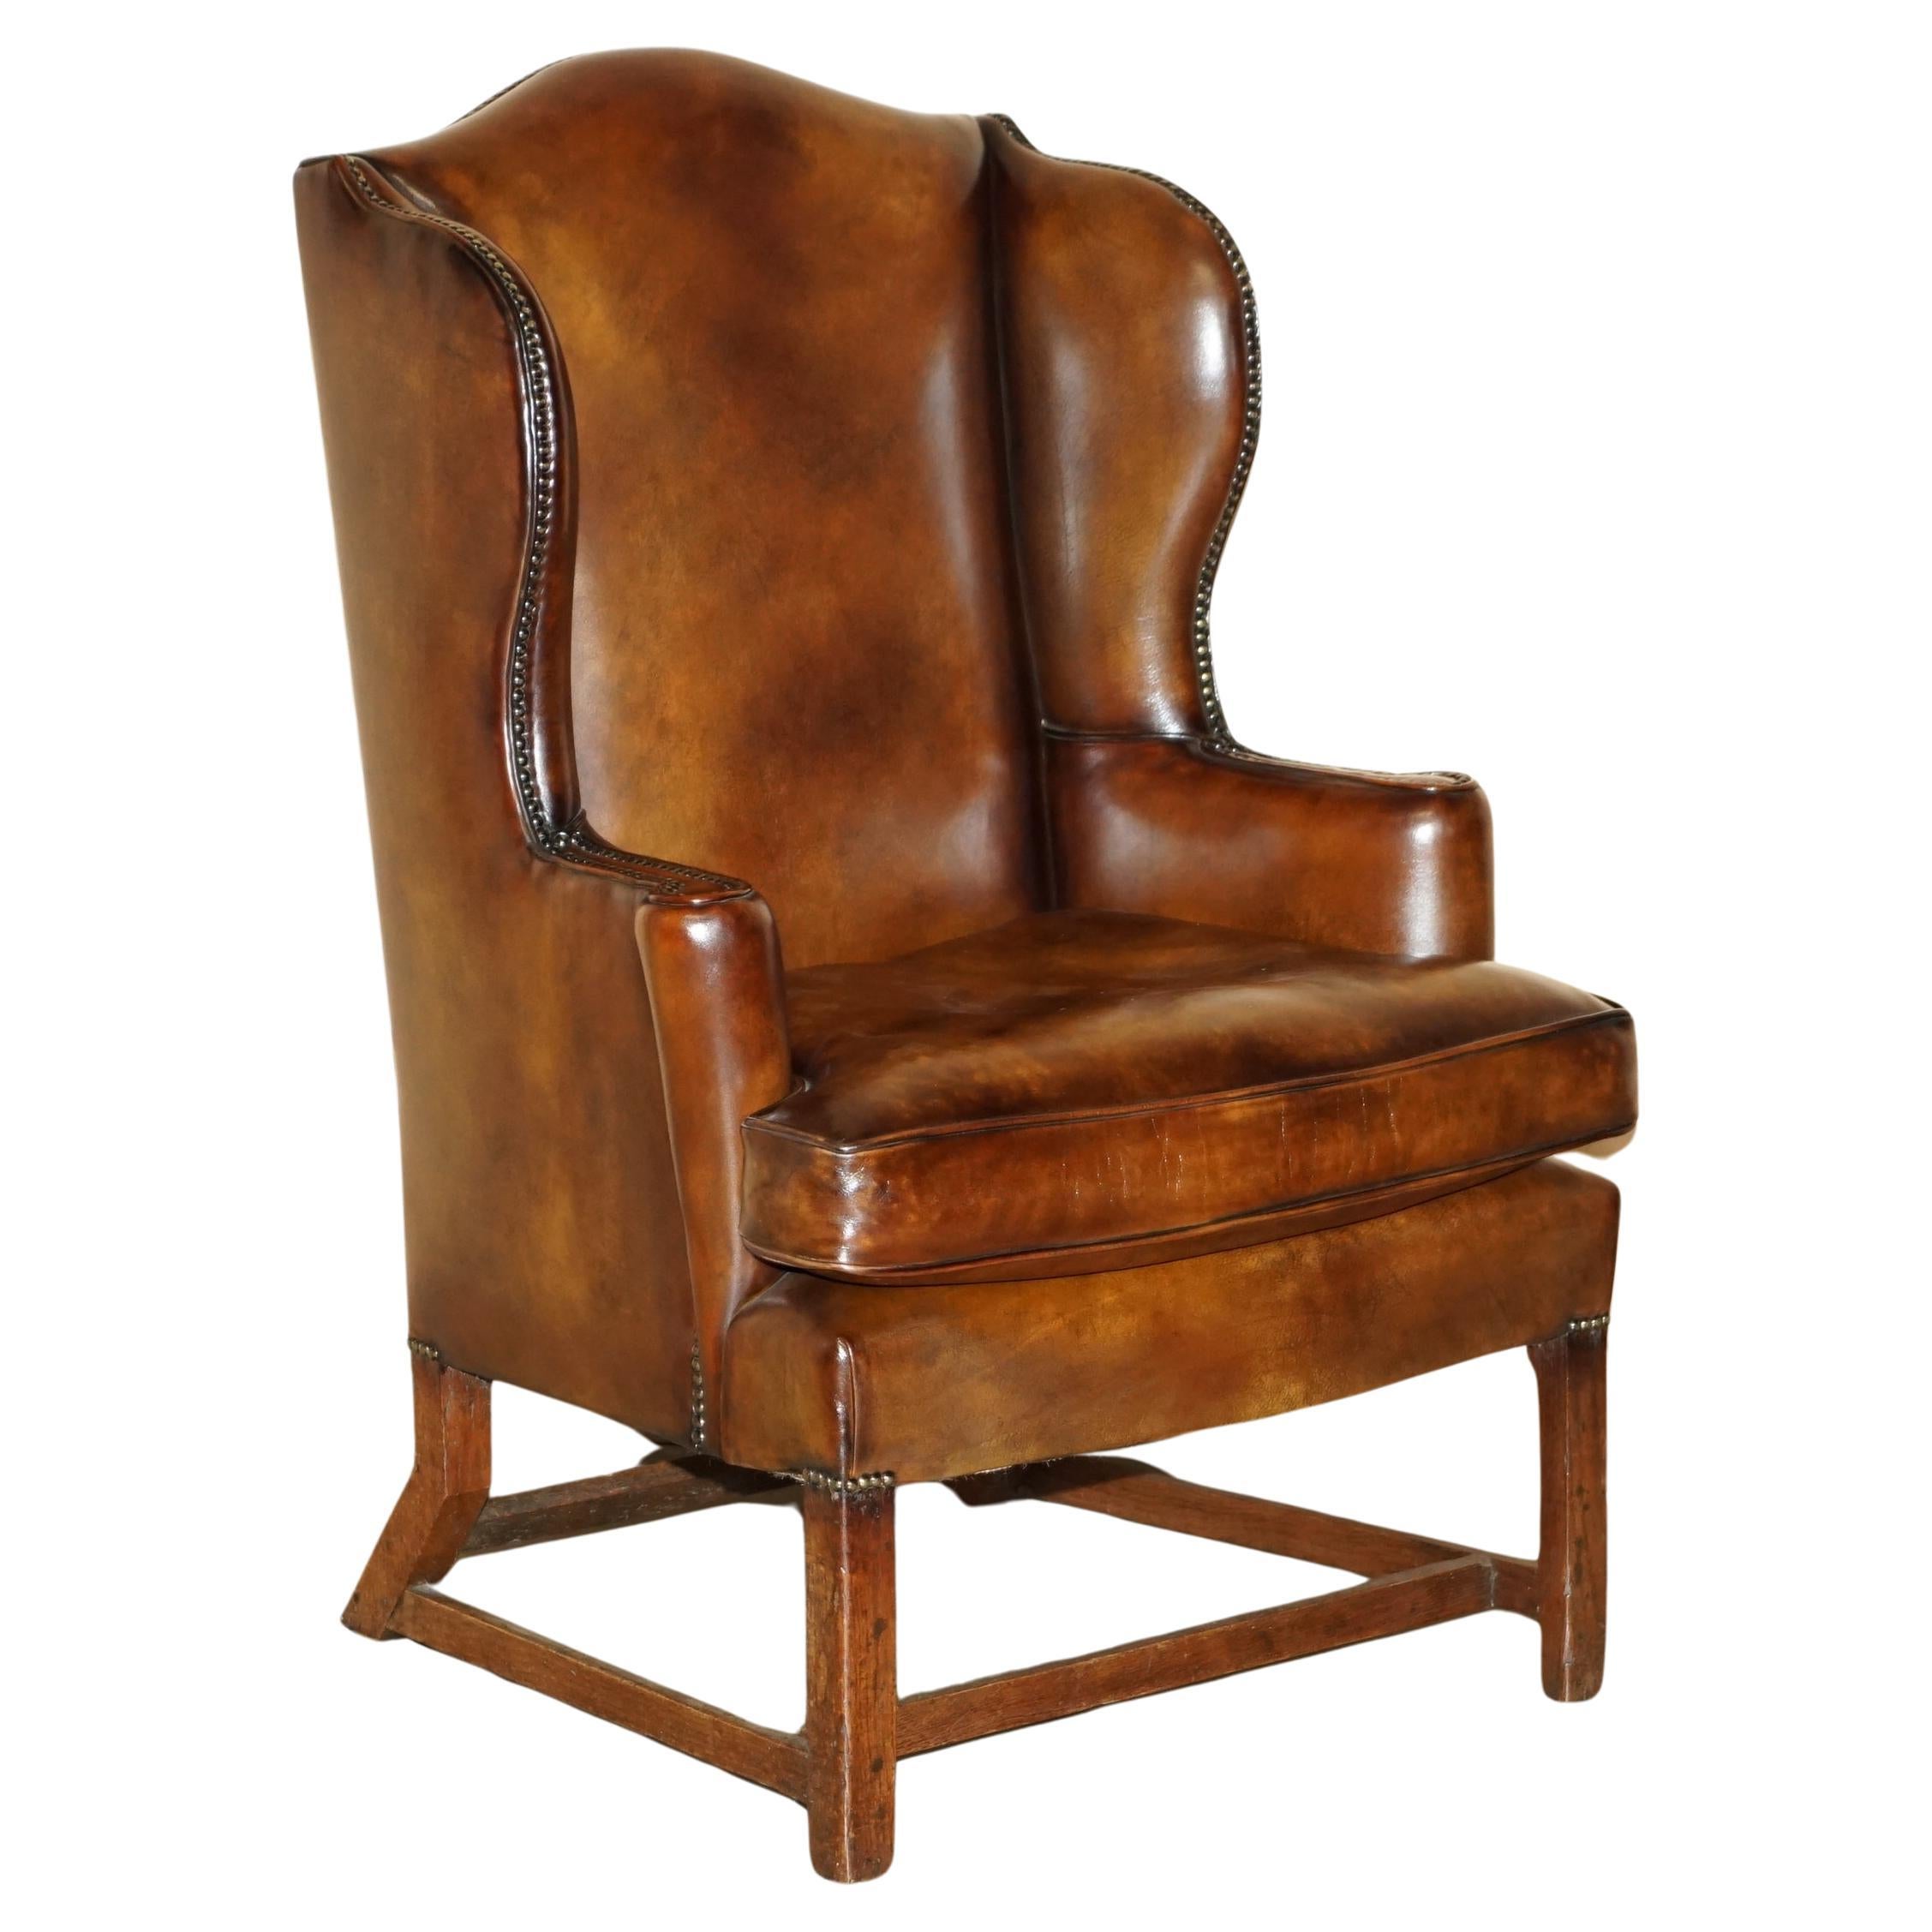 SUPER FINE RESTORED GEORGE III PERIOD CIRCA 1820 WiNGBACK BROWN LEATHER ARMCHAIR For Sale